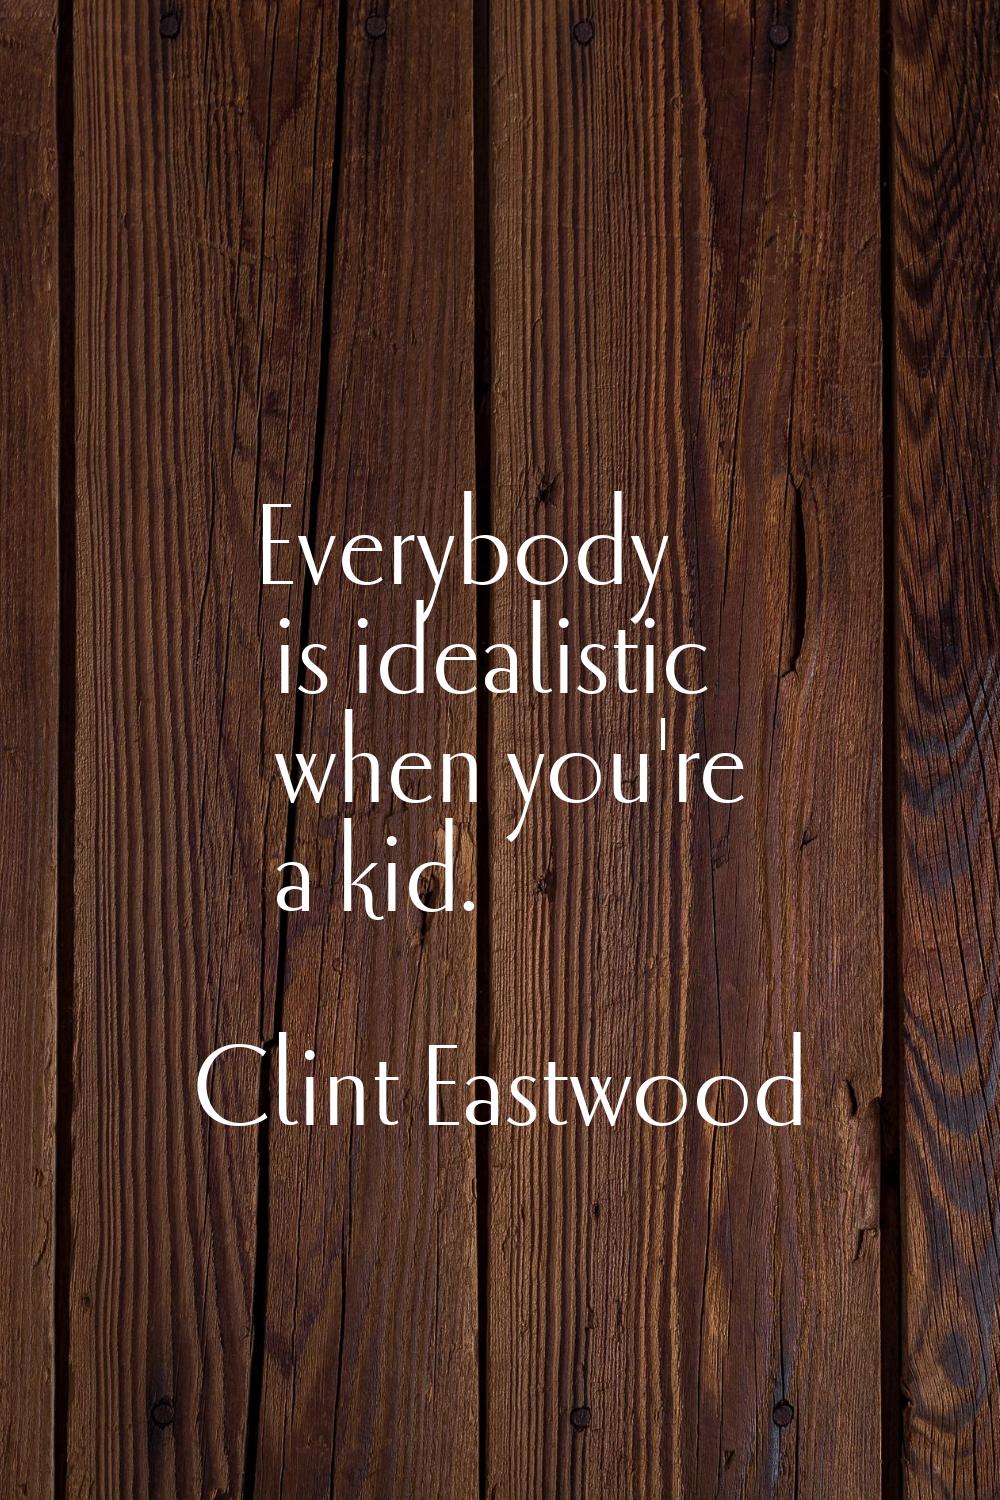 Everybody is idealistic when you're a kid.